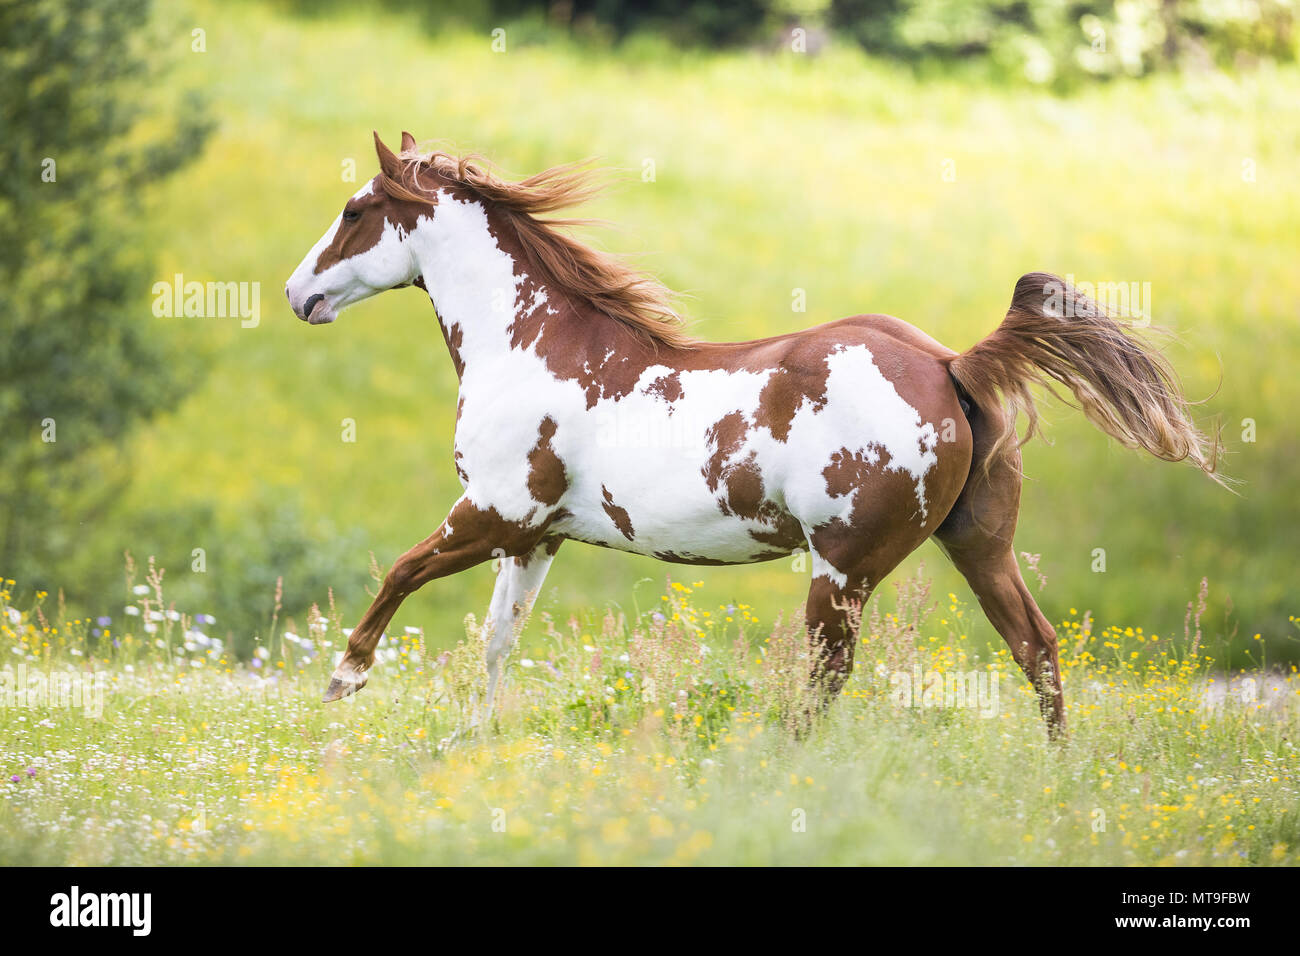 American Paint Horse. Mare (Overo) galloping on a pasture. Austria Stock Photo